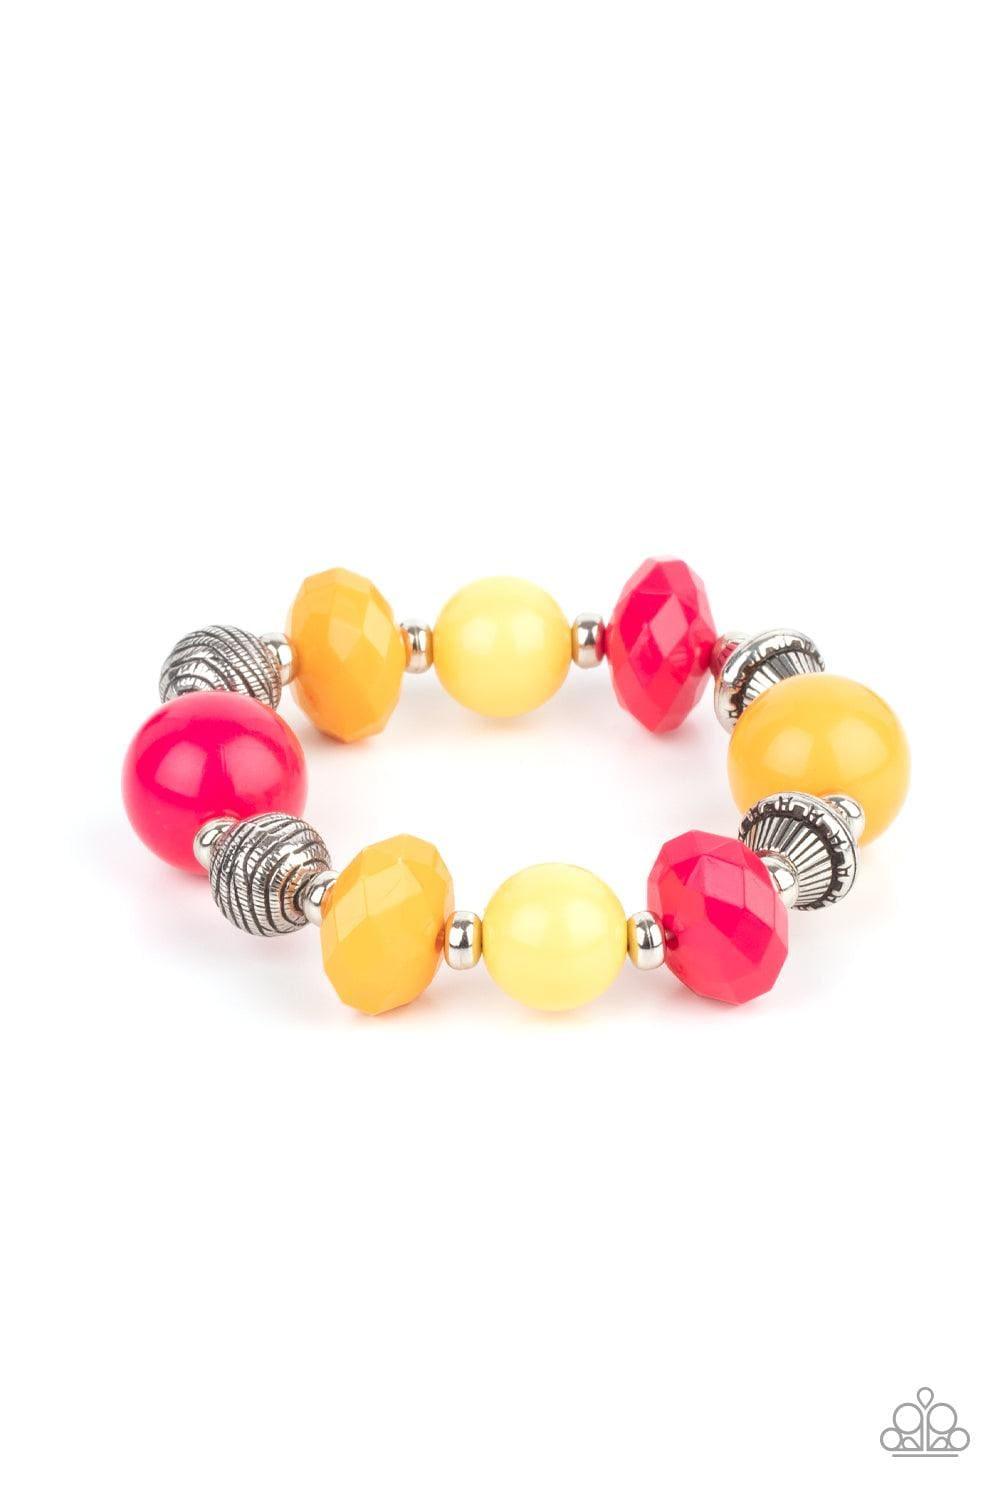 Paparazzi Accessories - Day Trip Discovery - Multicolor Bracelet - Bling by JessieK